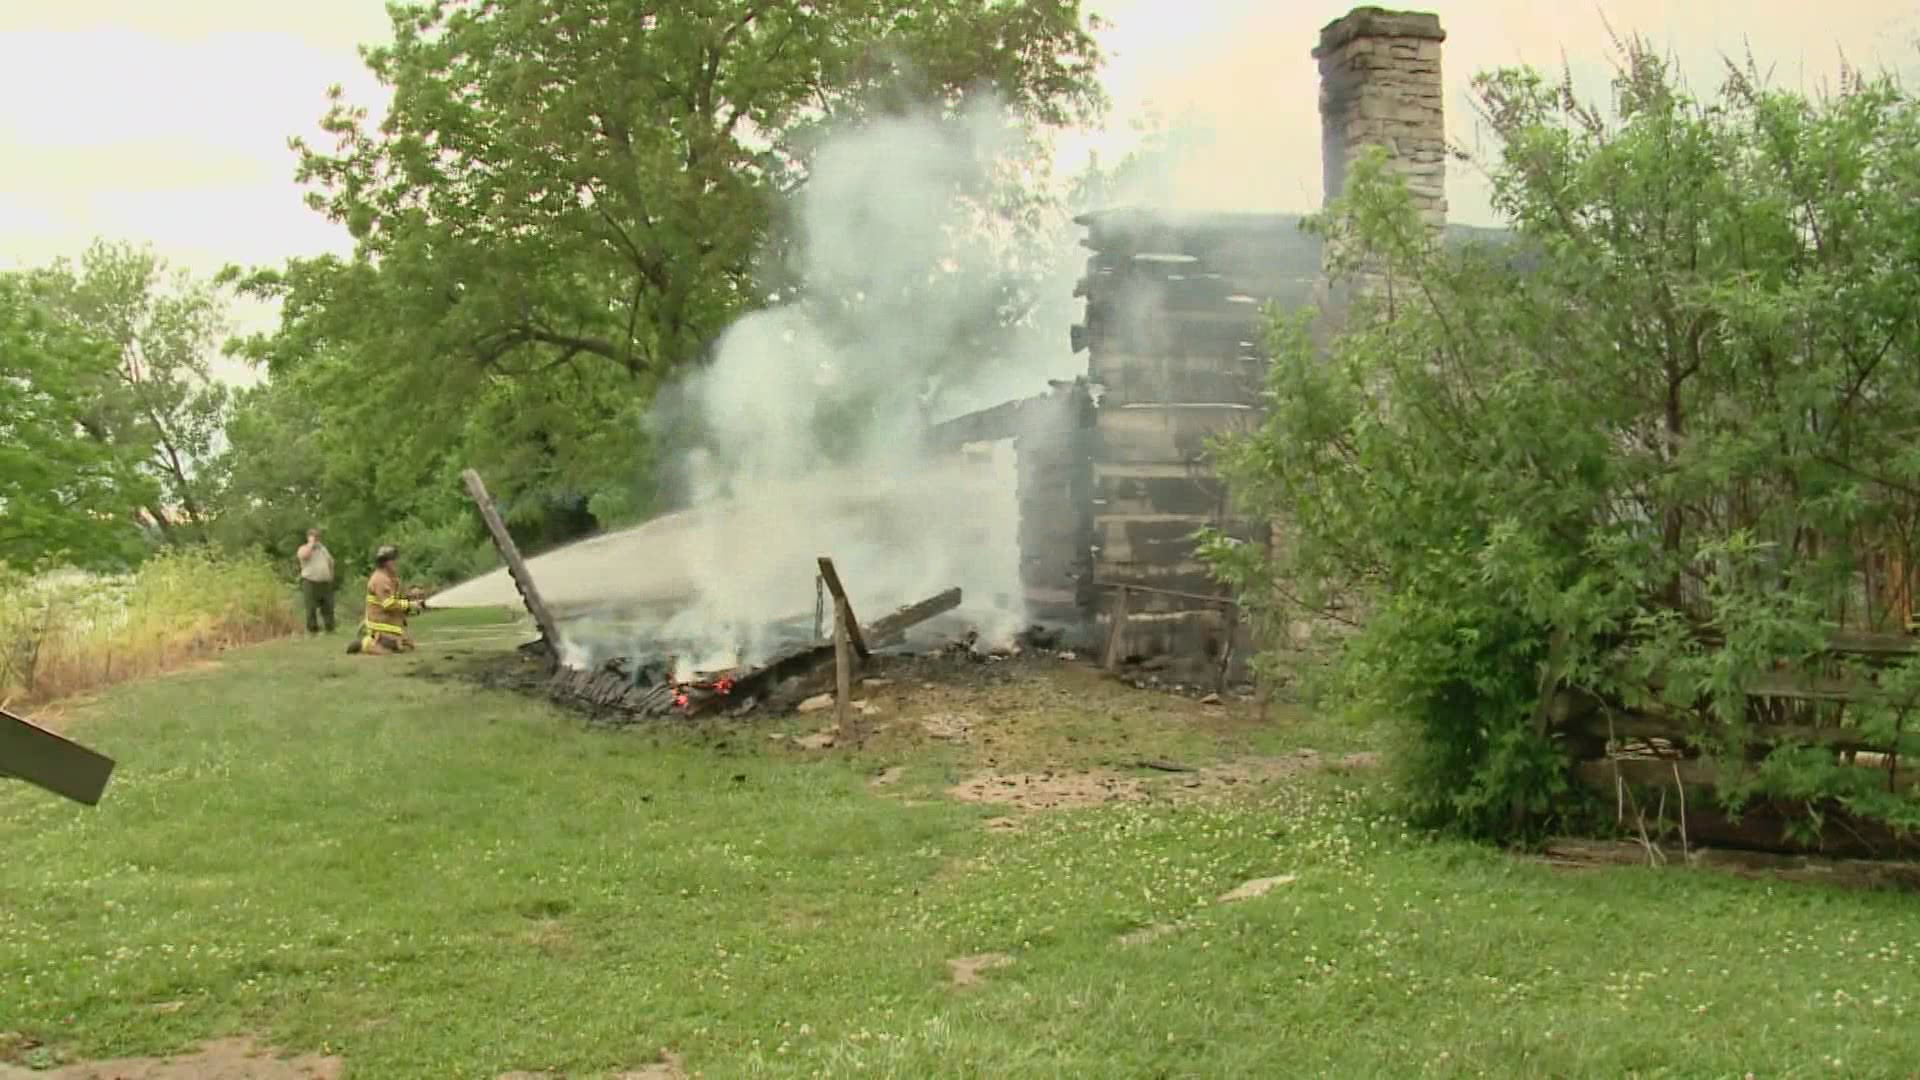 A cabin on the George Rogers Clark historical site was burned, causing serious damage. Clarksville Police have arrested a suspect.